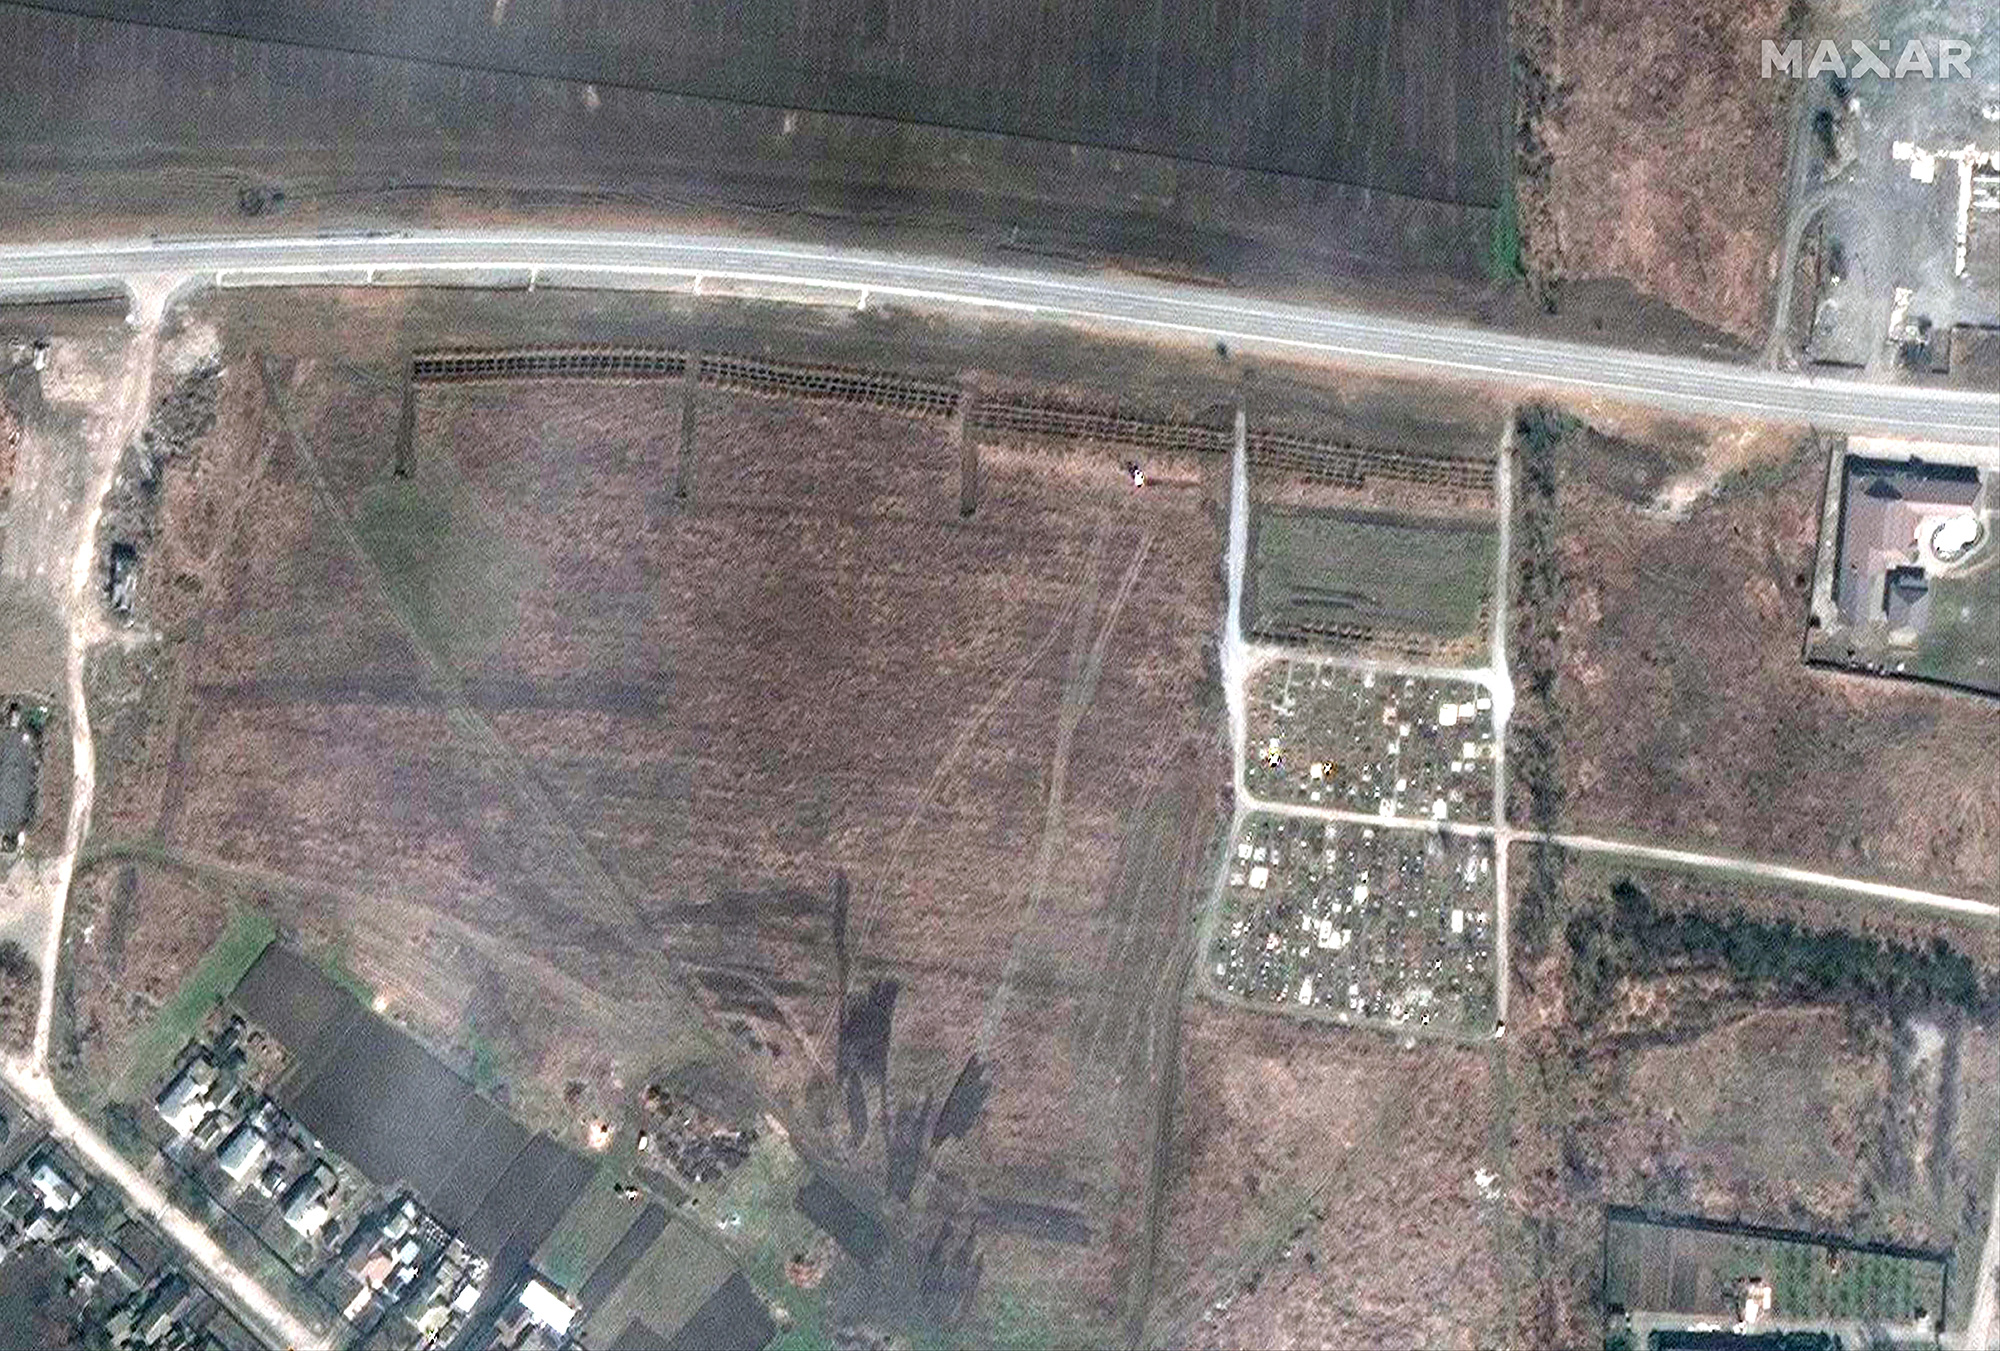 A satellite image showing an overview of the cemetery in Manhush, west of Mariupol, Ukraine.